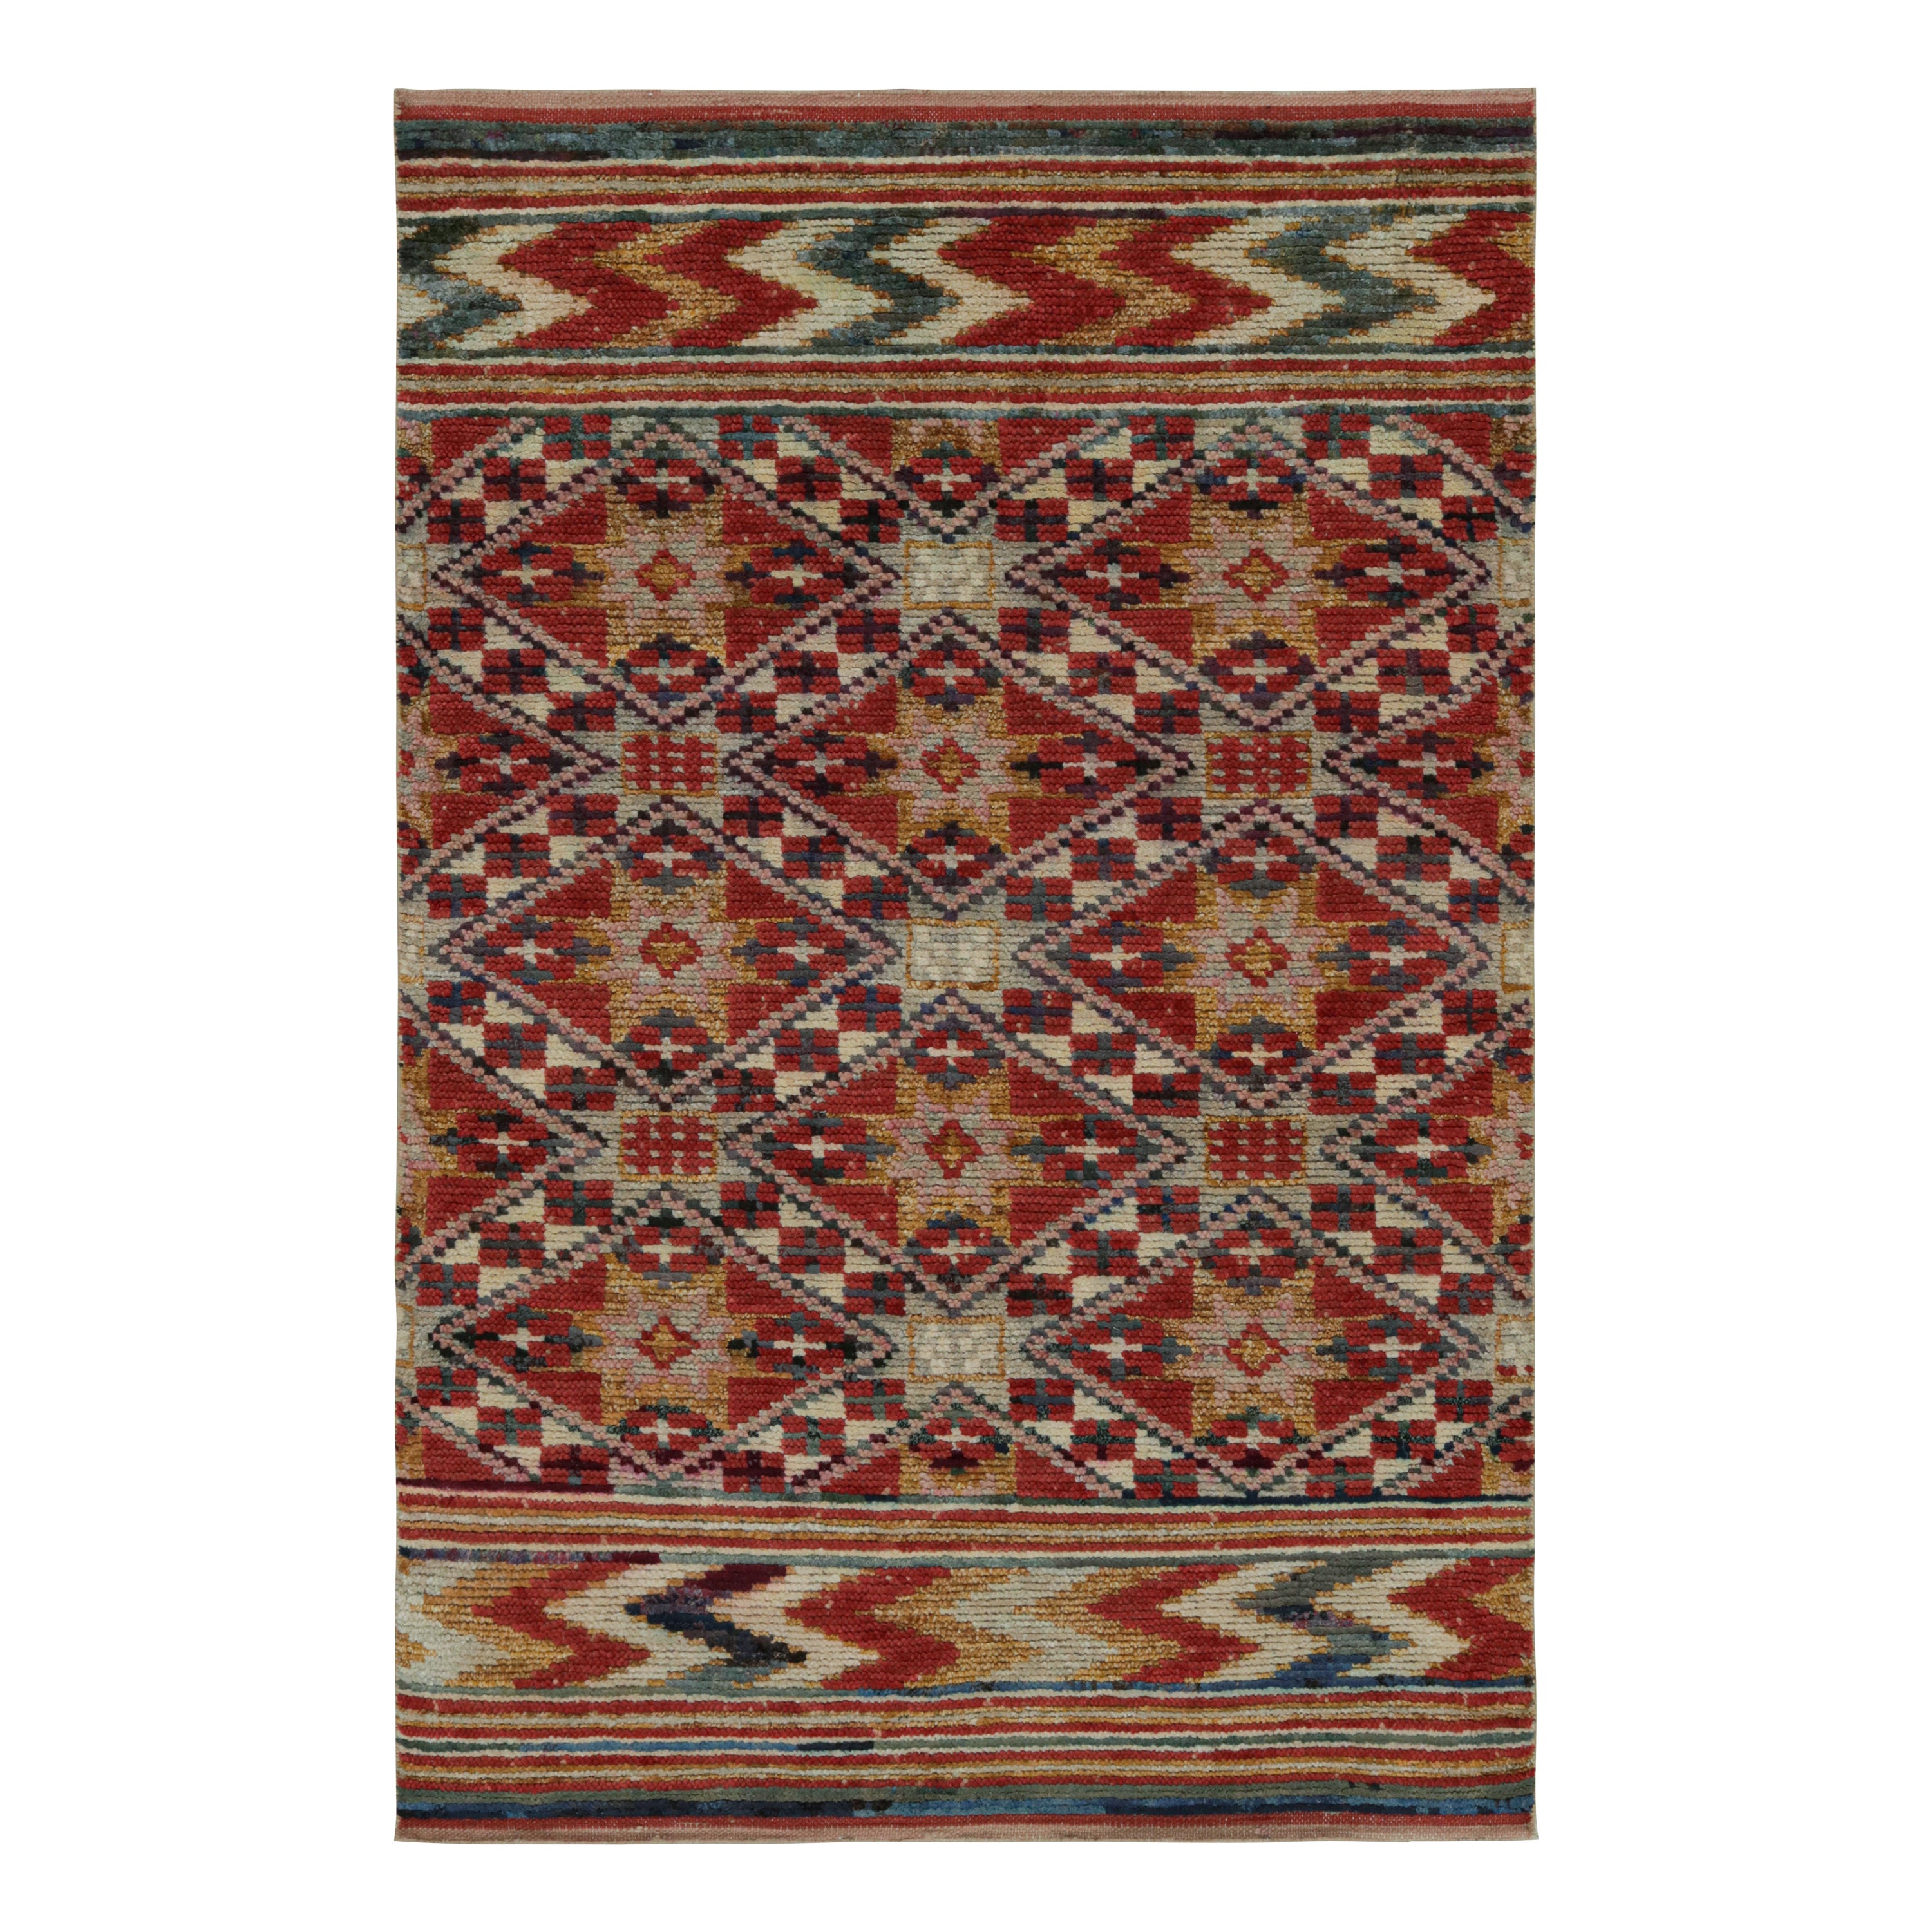 Rug & Kilim’s Contemporary Moroccan Style Rug with Berber Geometric Patterns